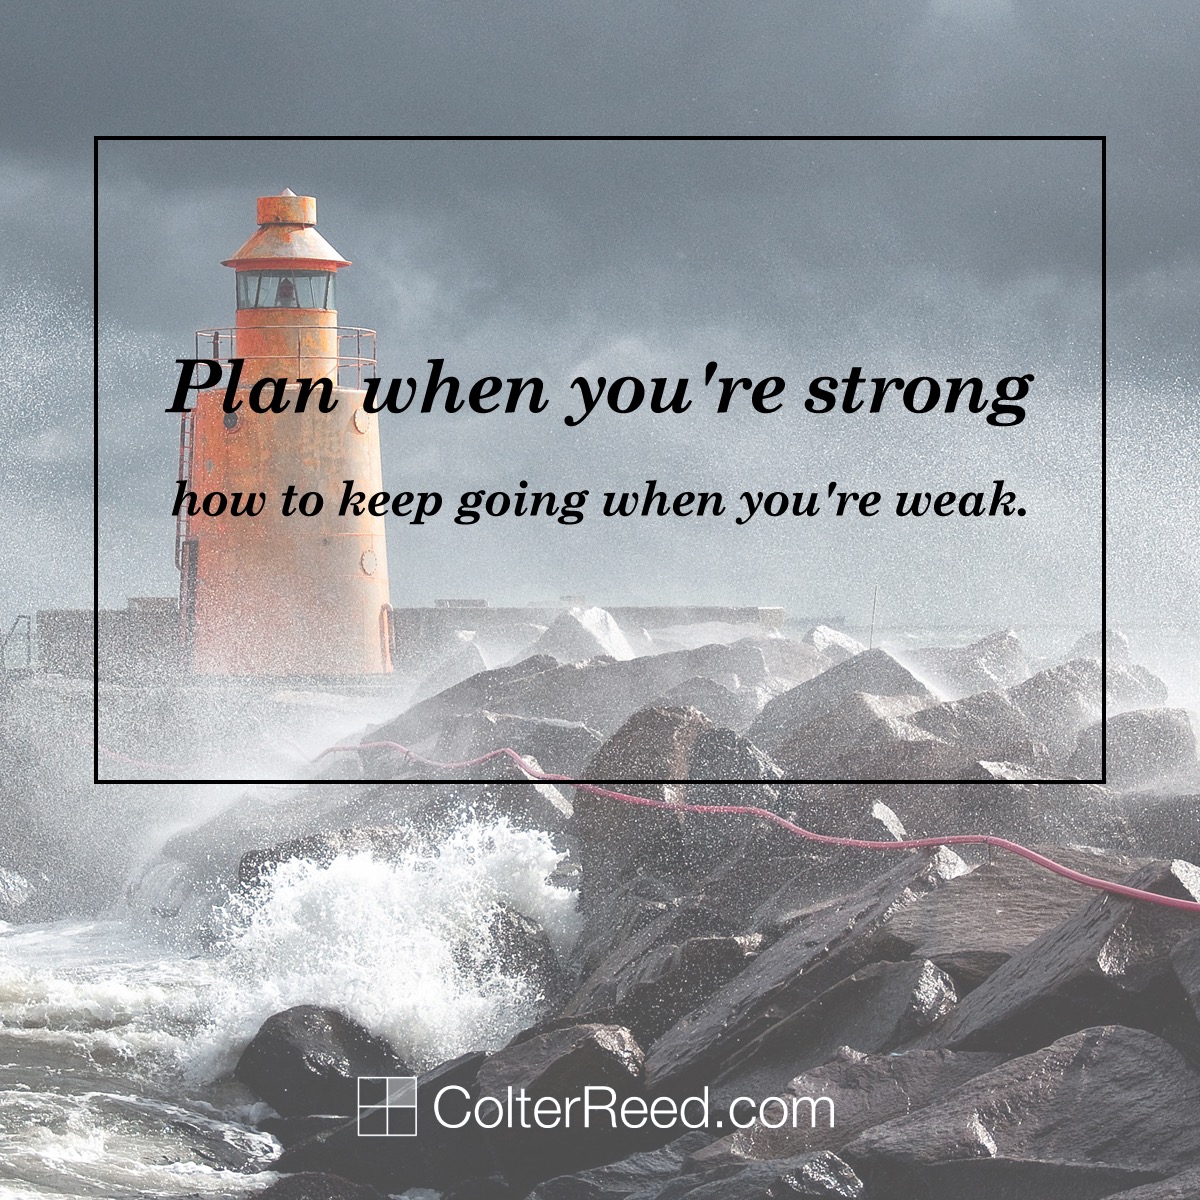 Plan when you’re strong how to keep going when you’re weak.